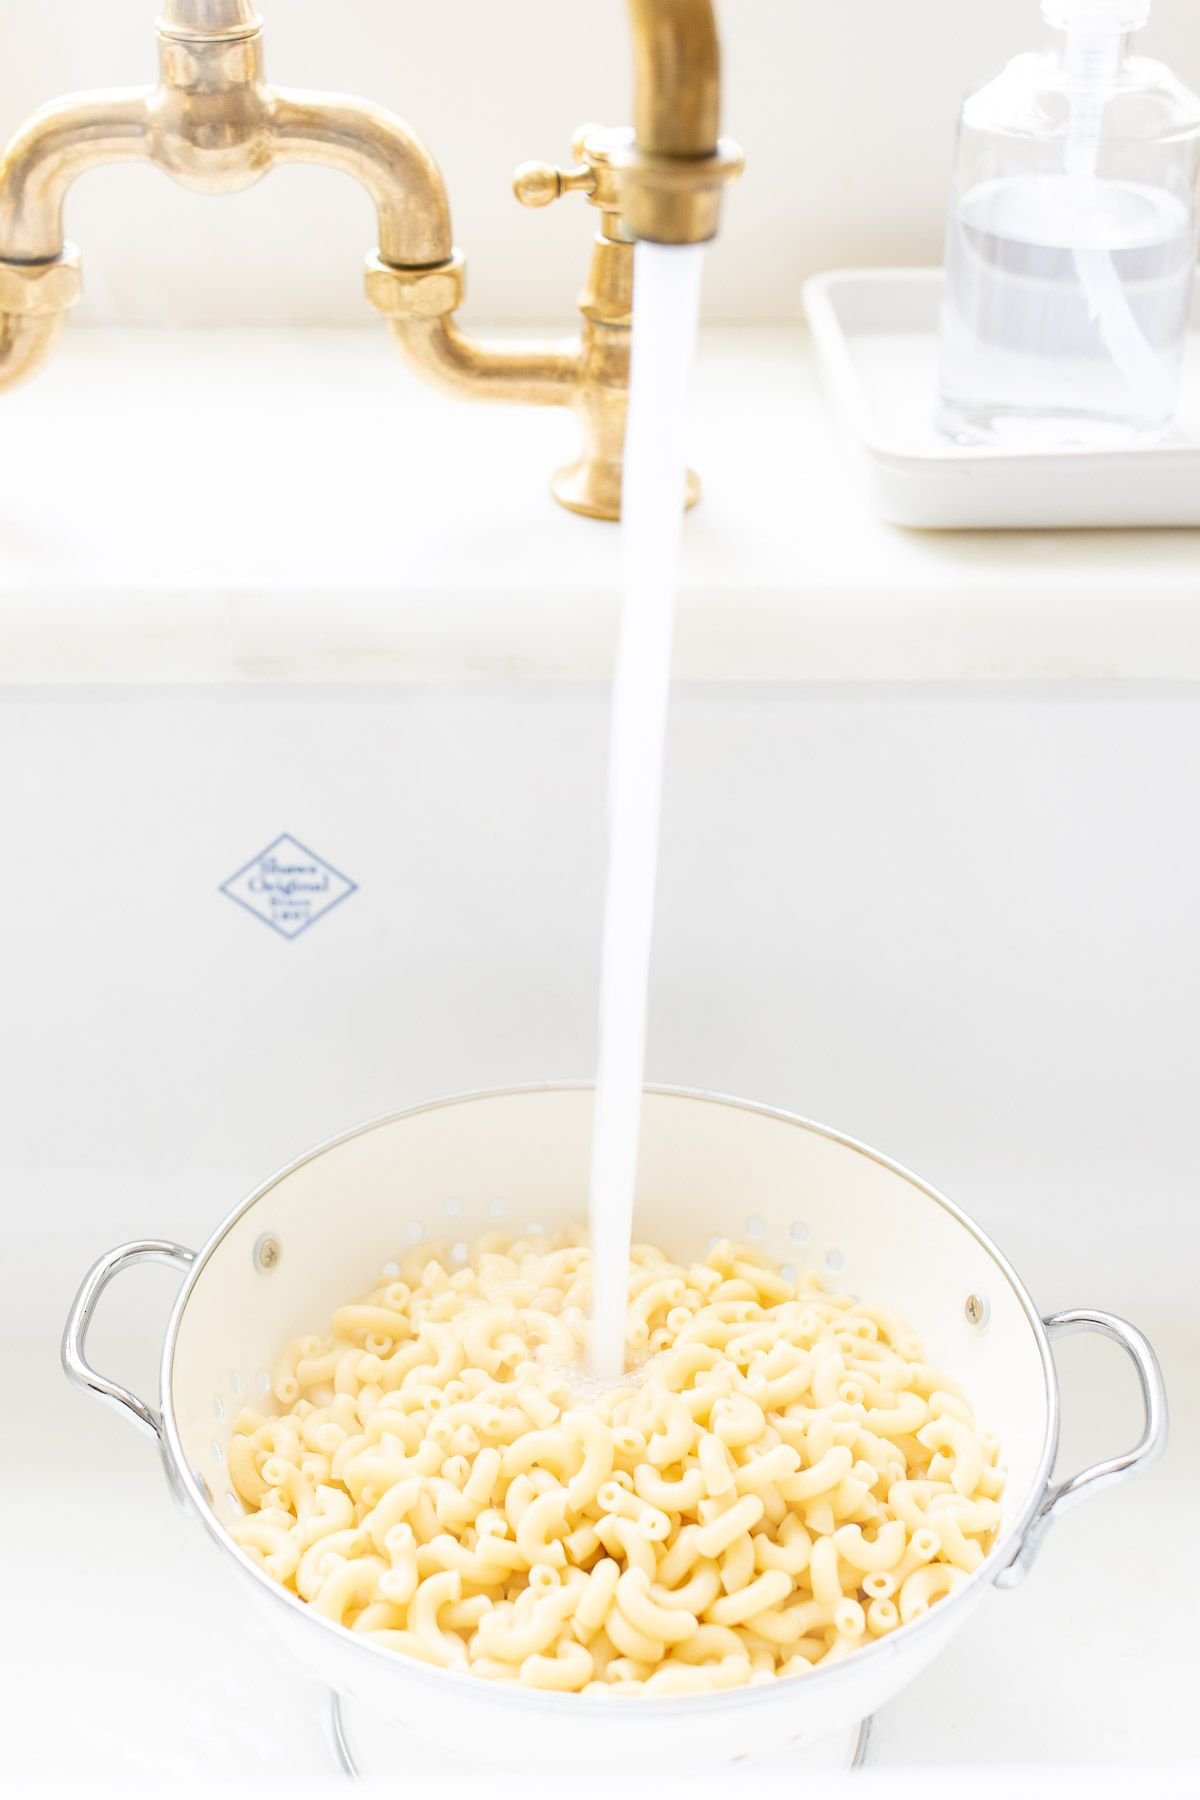 A strainer full of macaroni pasta in a white sink.